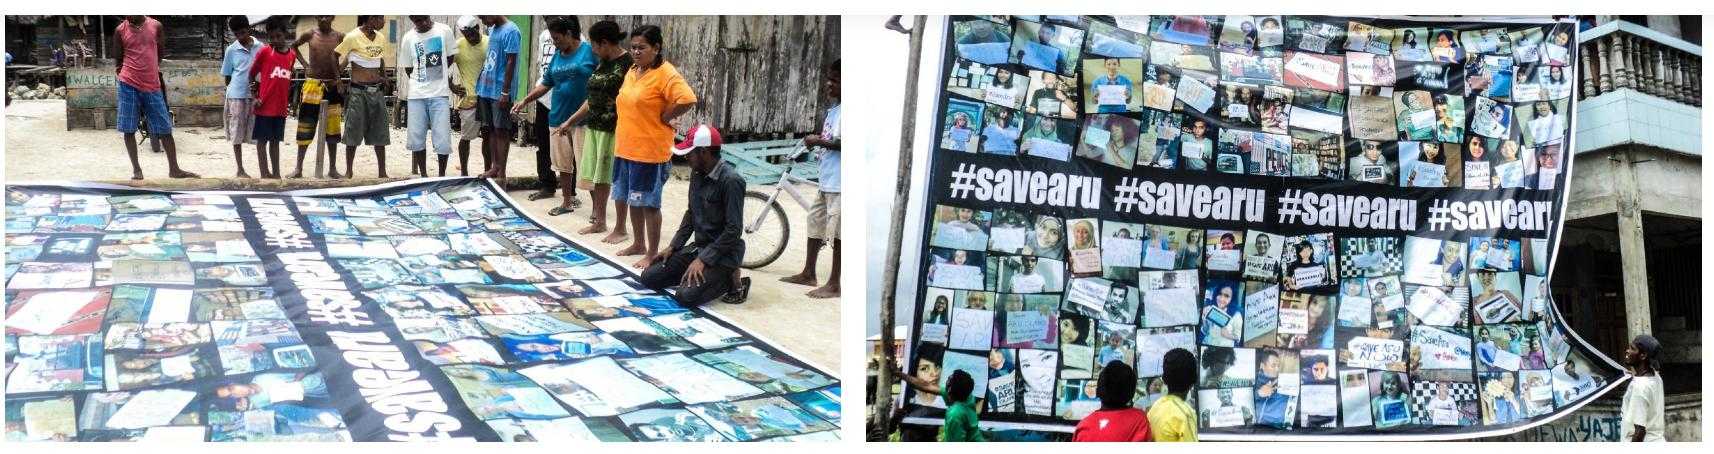 The activists printed a giant banner bearing messages of support from Twitter.